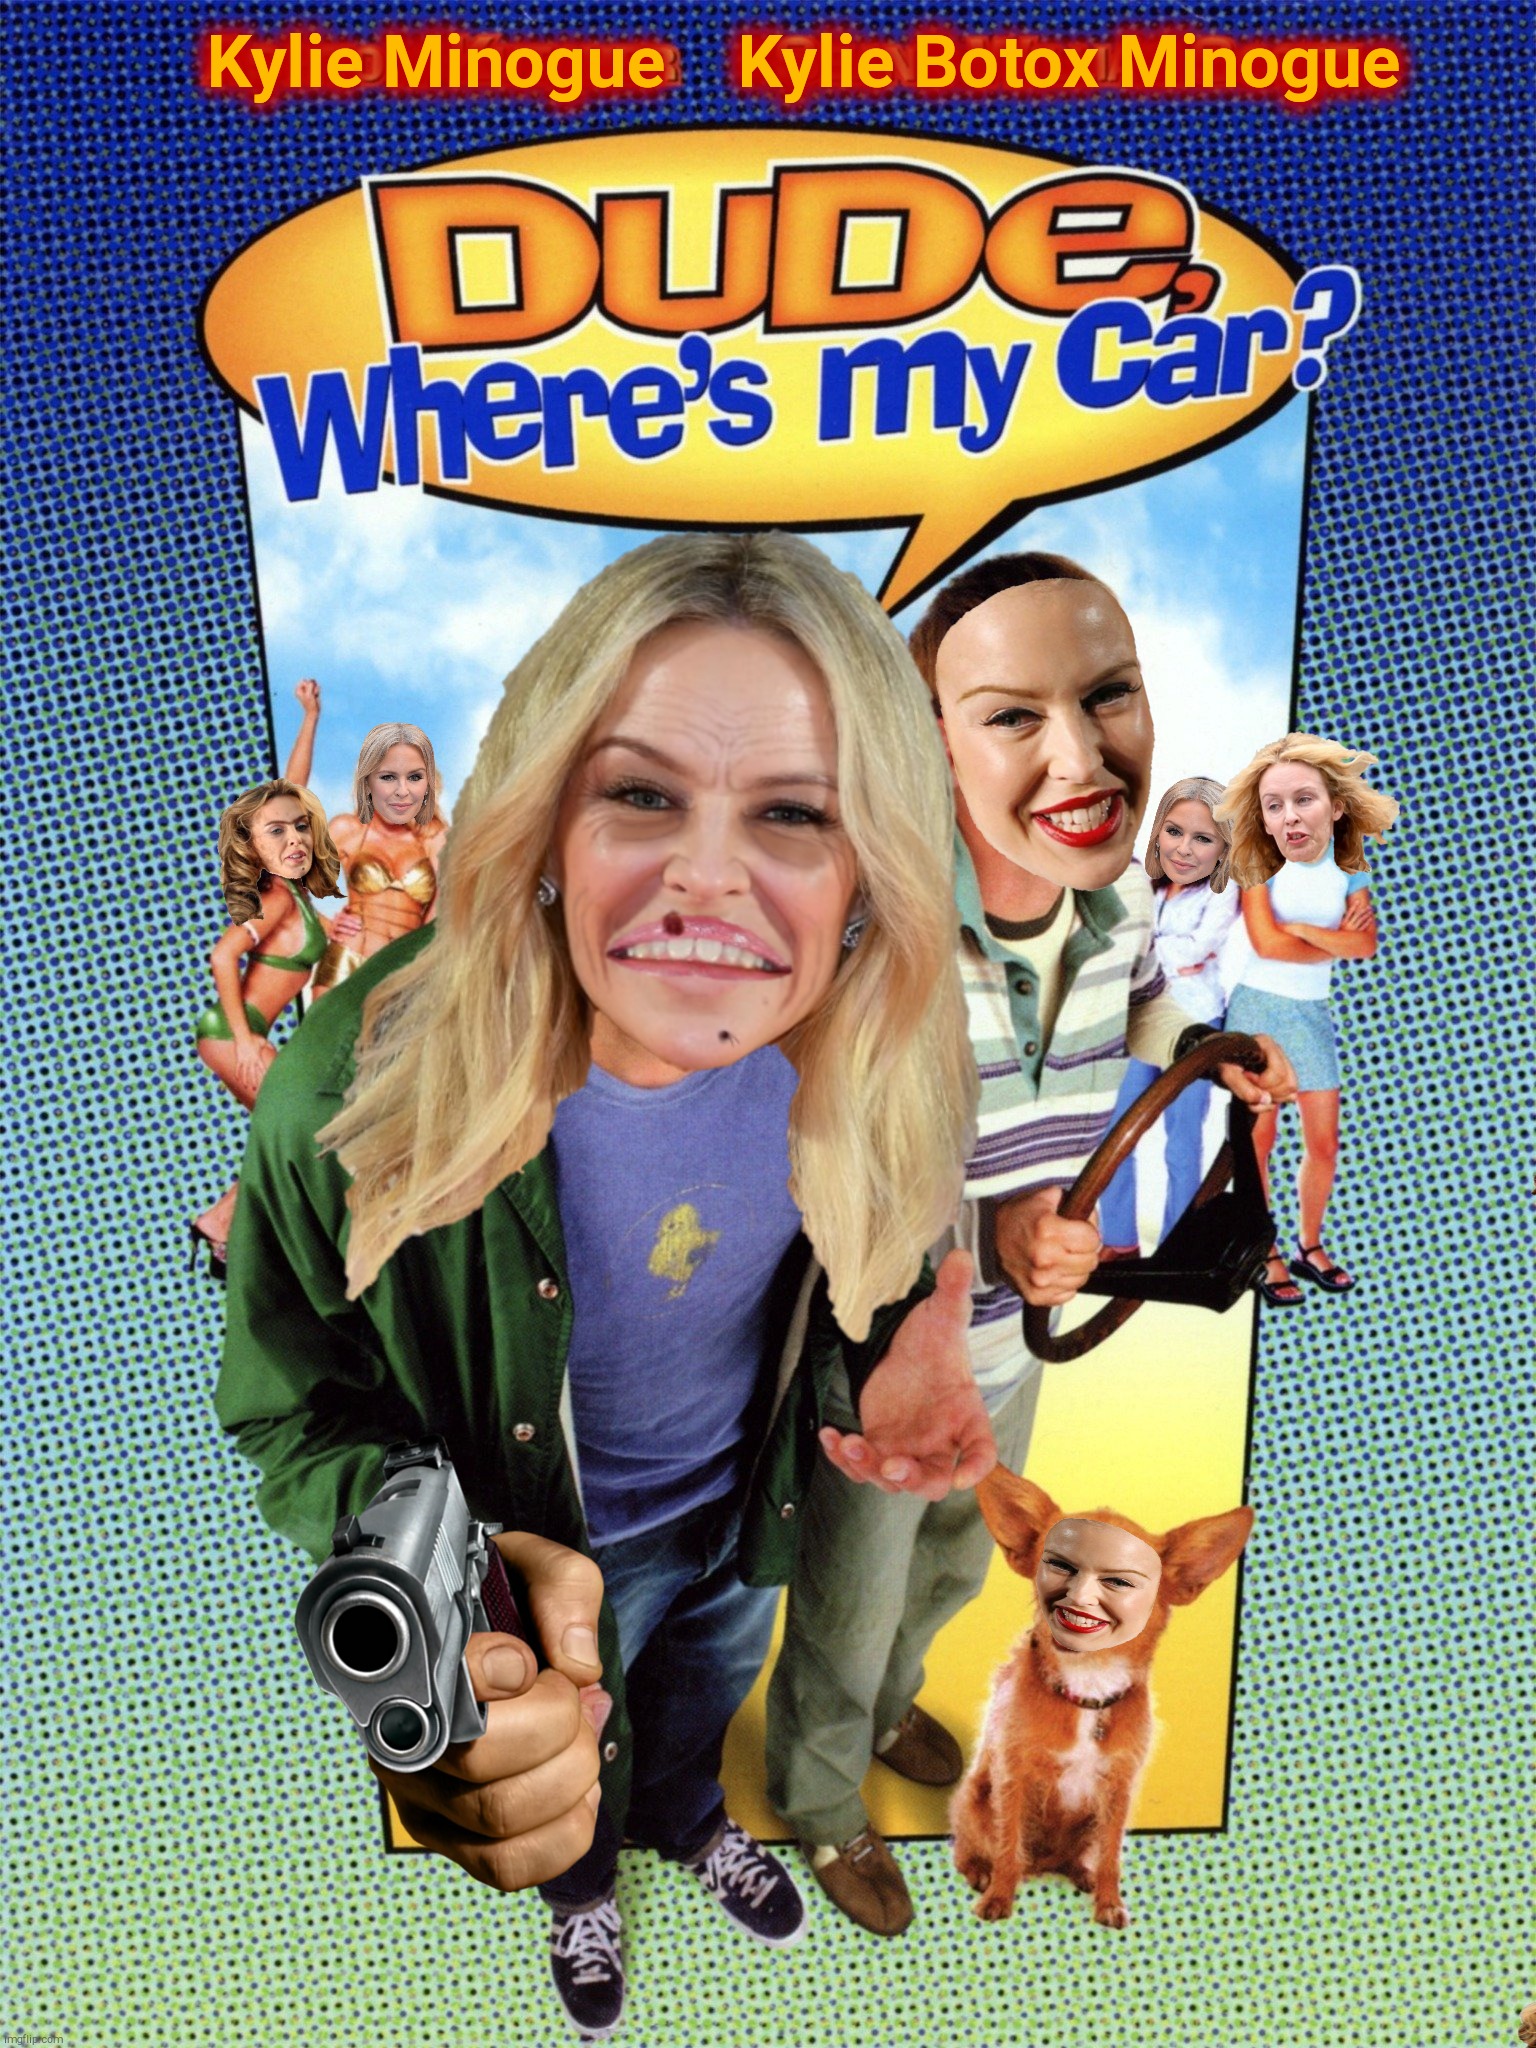 Kylie 'Mutton' Minogue looking for her next ride,,, | Kylie Minogue    Kylie Botox Minogue | image tagged in dude where's my car,kylie minogue hideous old bag,kylie botox mask,other kylie minogues,kylieminoguesucks,crossover templates | made w/ Imgflip meme maker